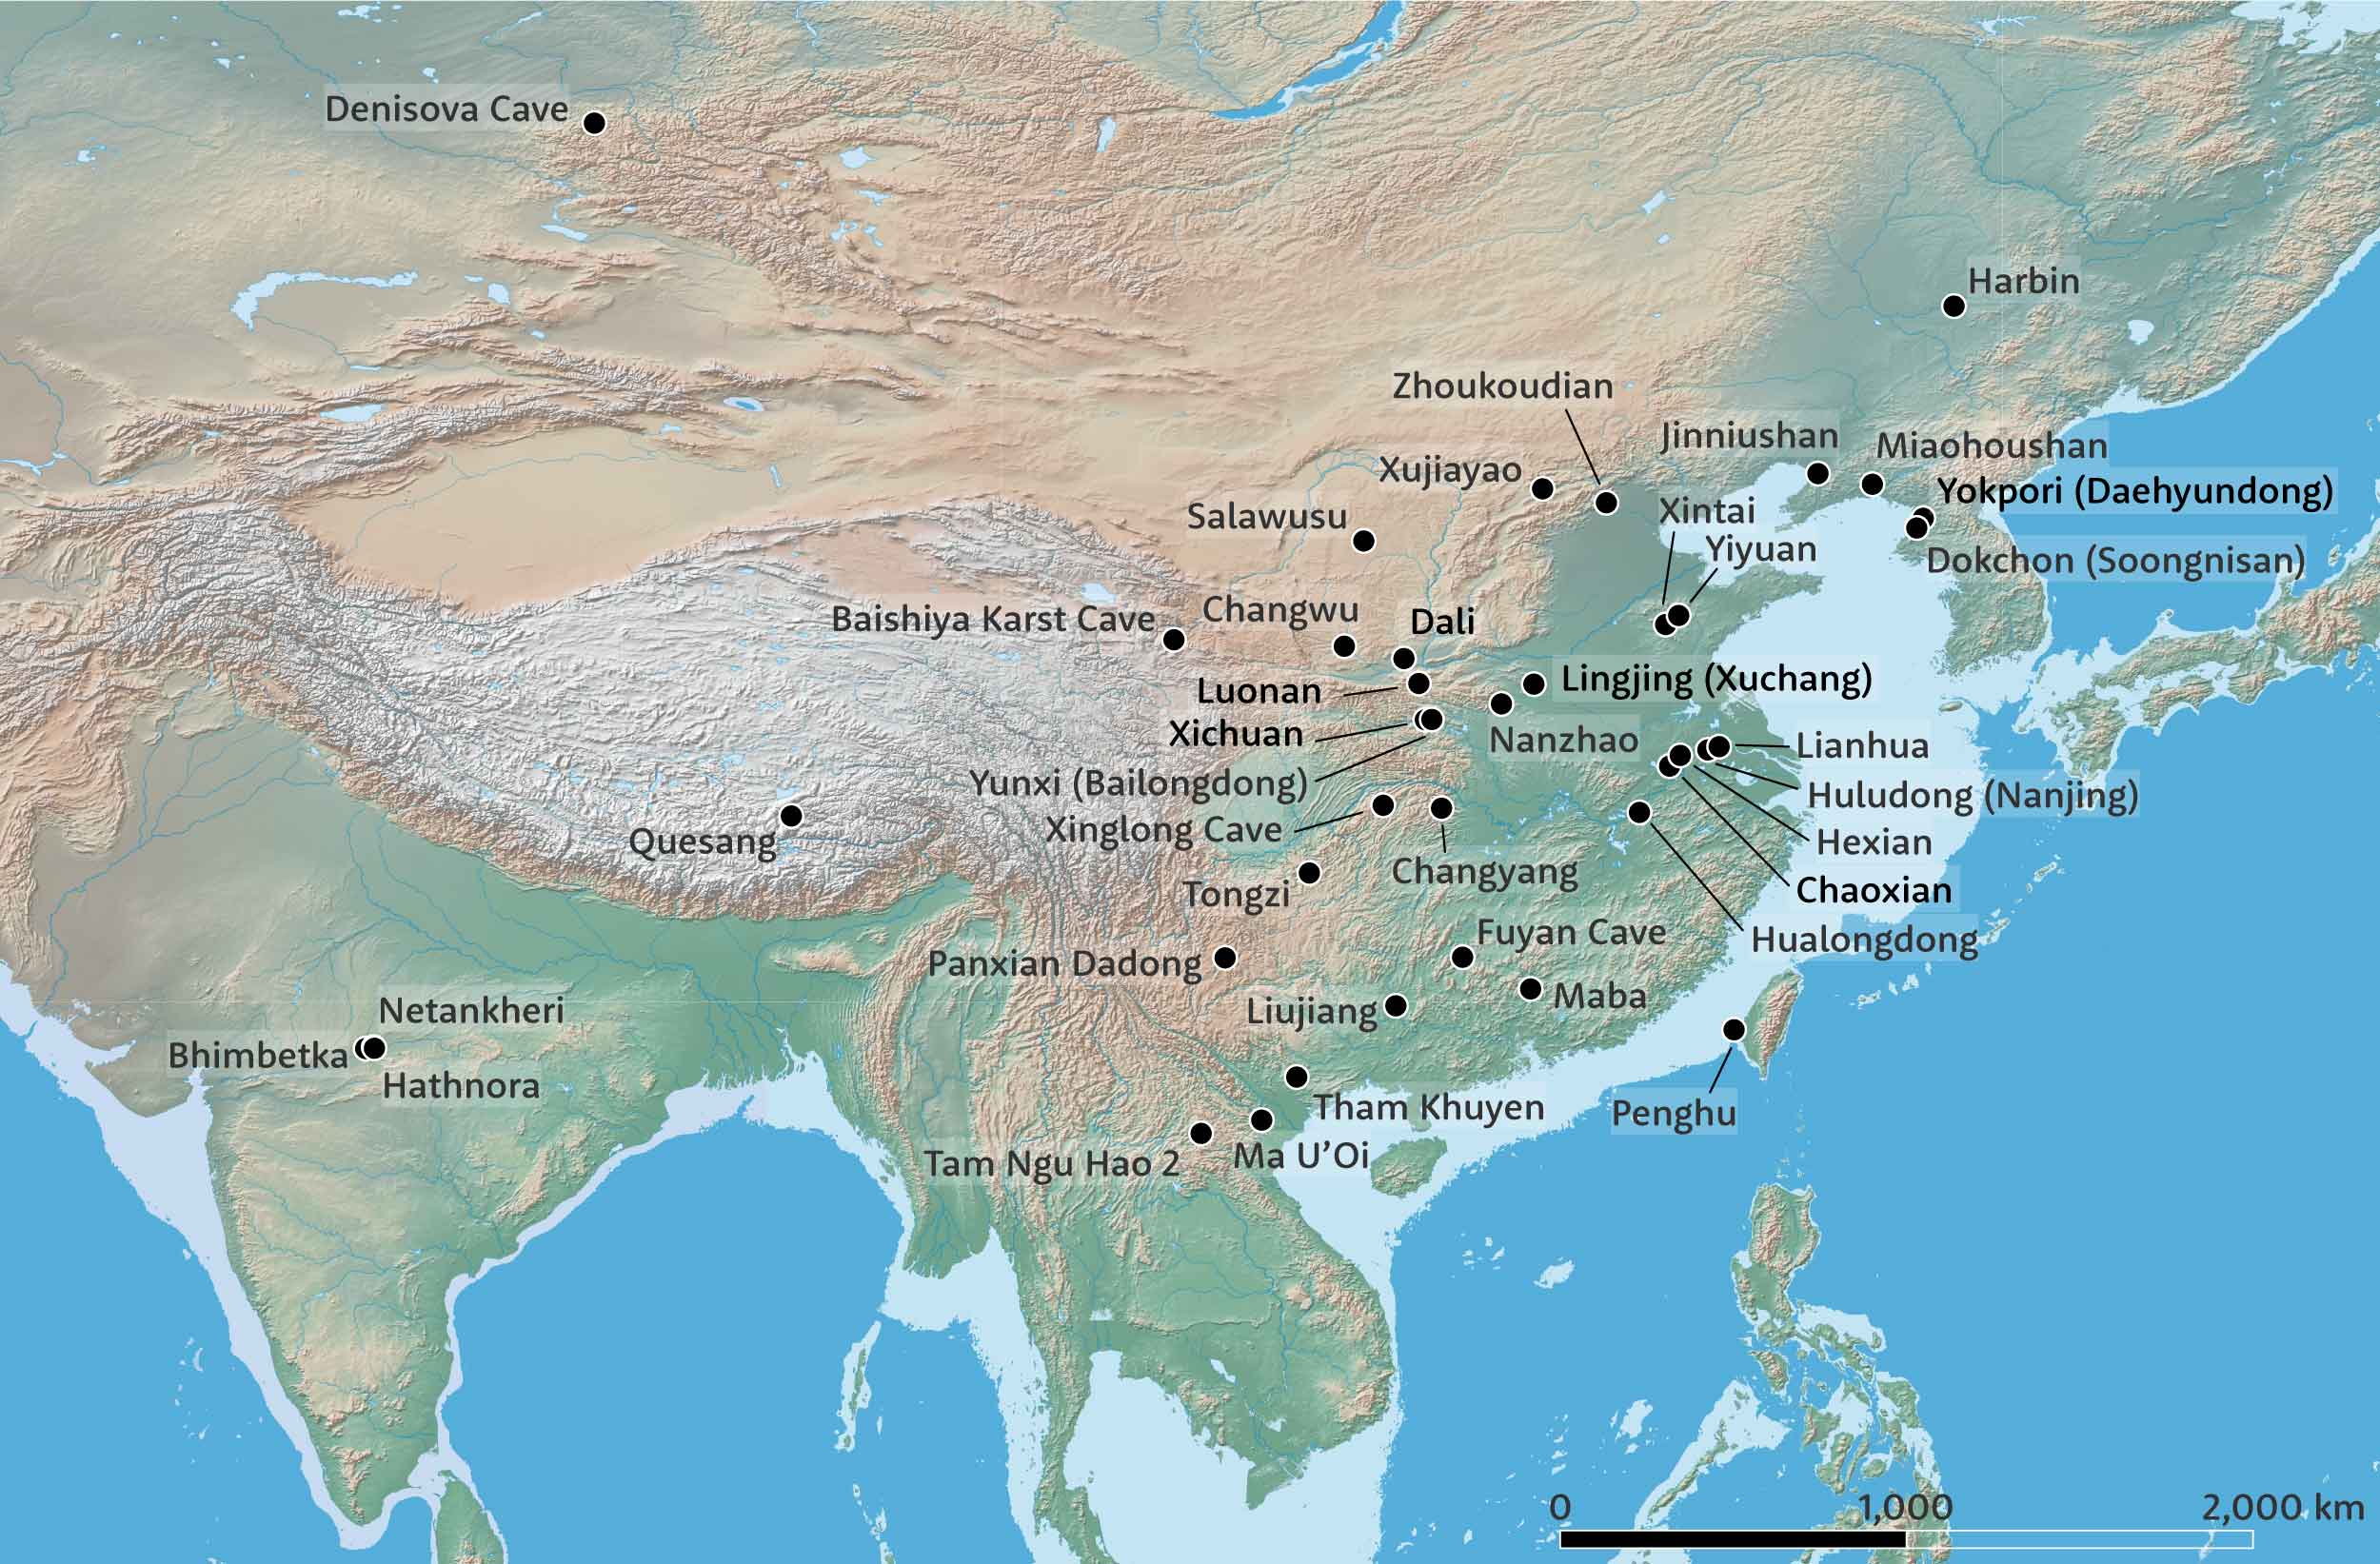 A map of eastern Eurasia showing the geographic locations of many hominin sites